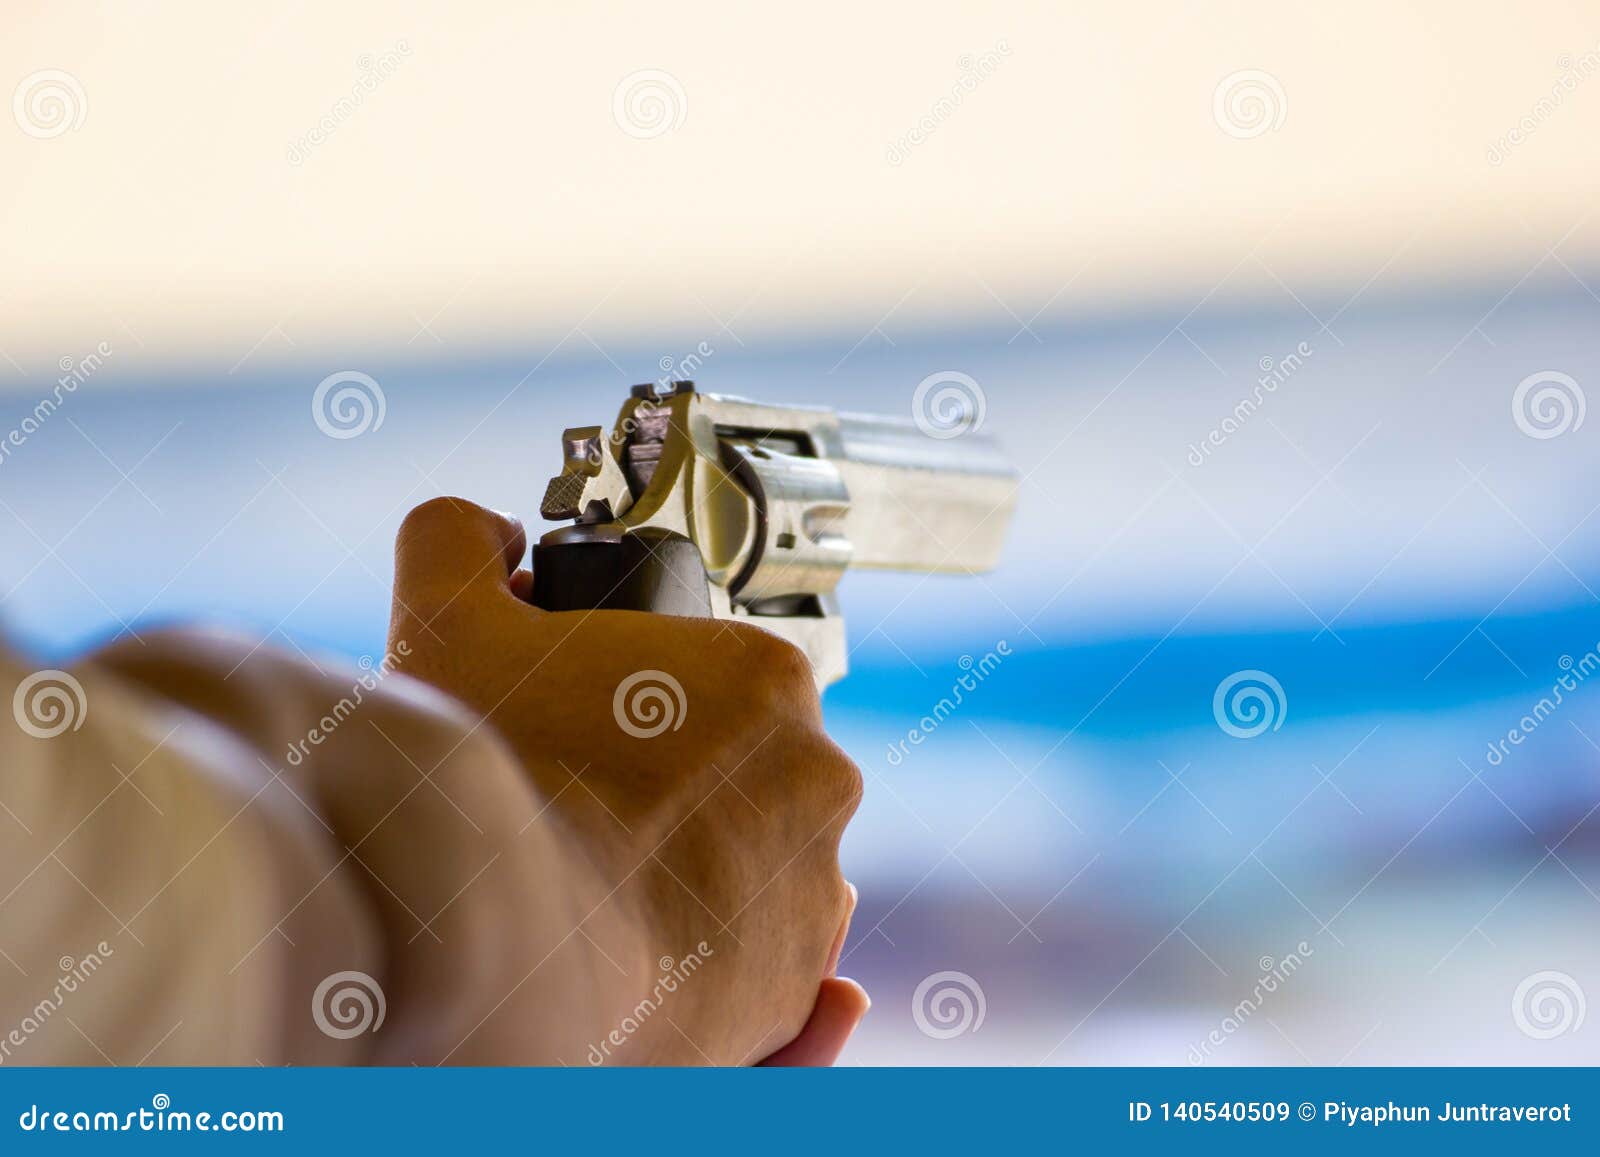 Man Holding Gun Ready To Shoot For Protect And Security 